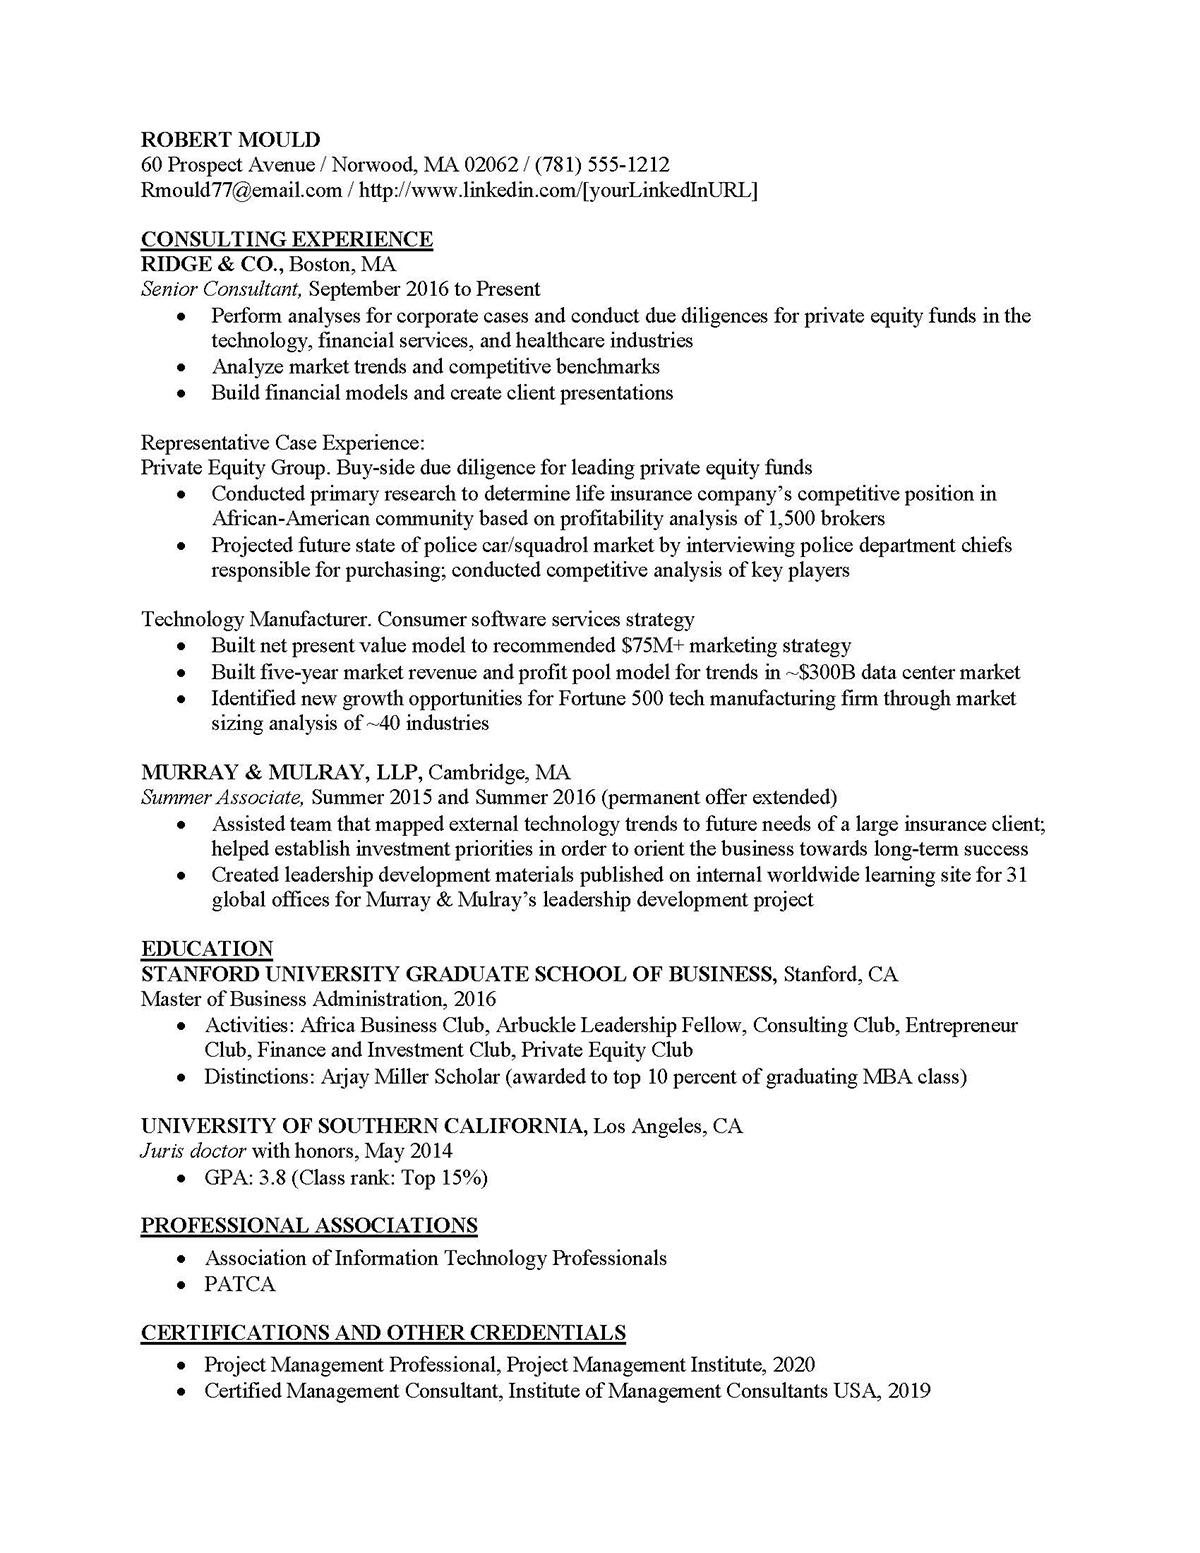 Sample resume: Consulting, Mid Experience, Chronological